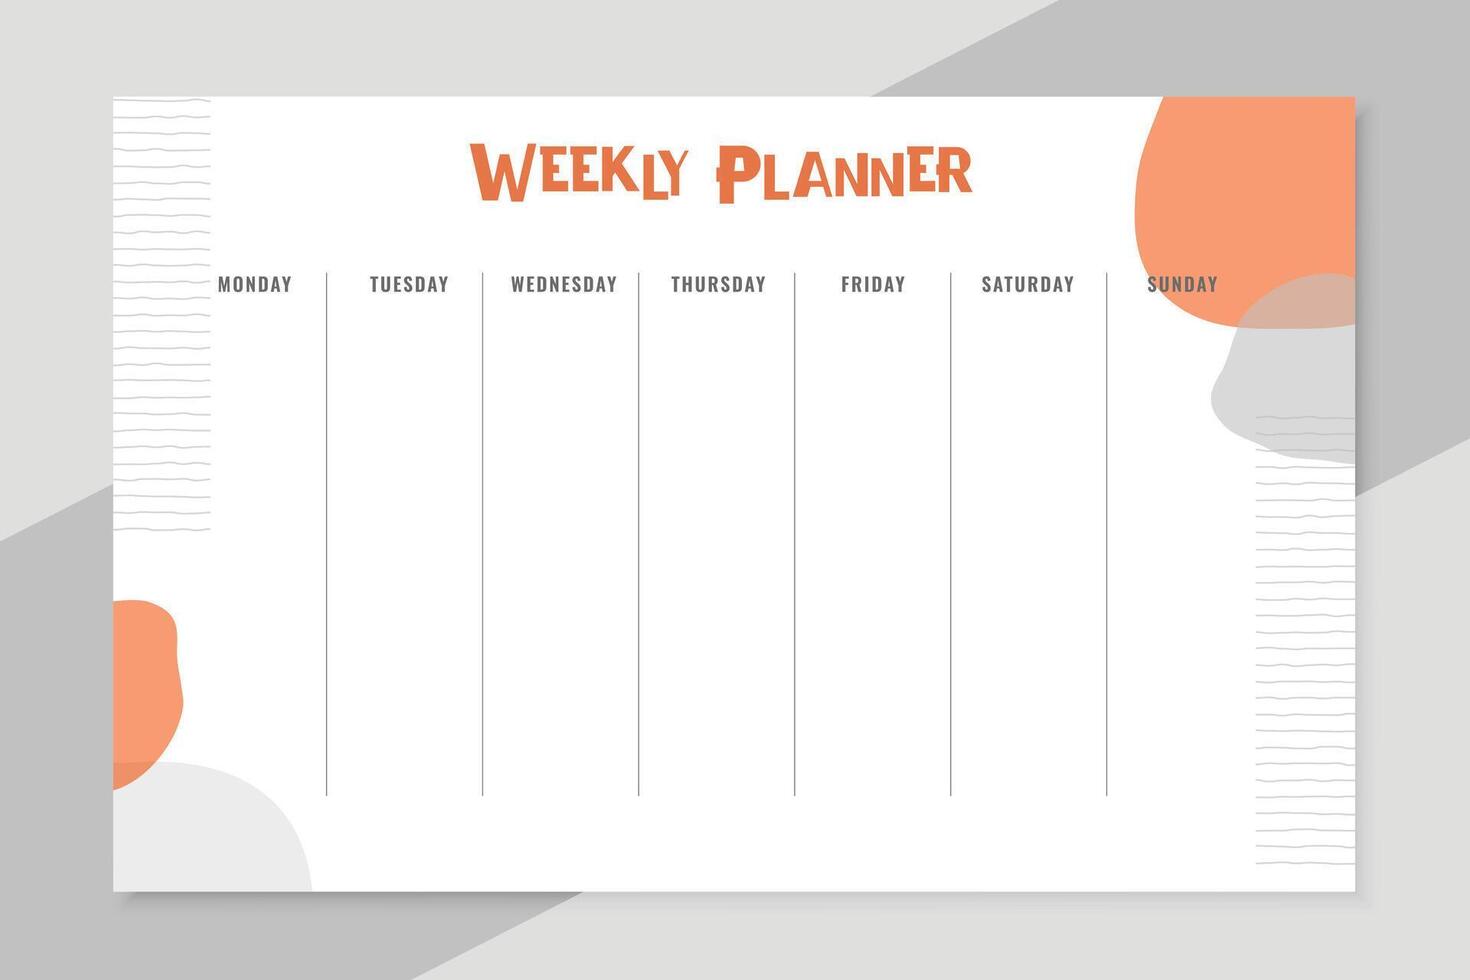 daily reminder planner template for whole week design vector